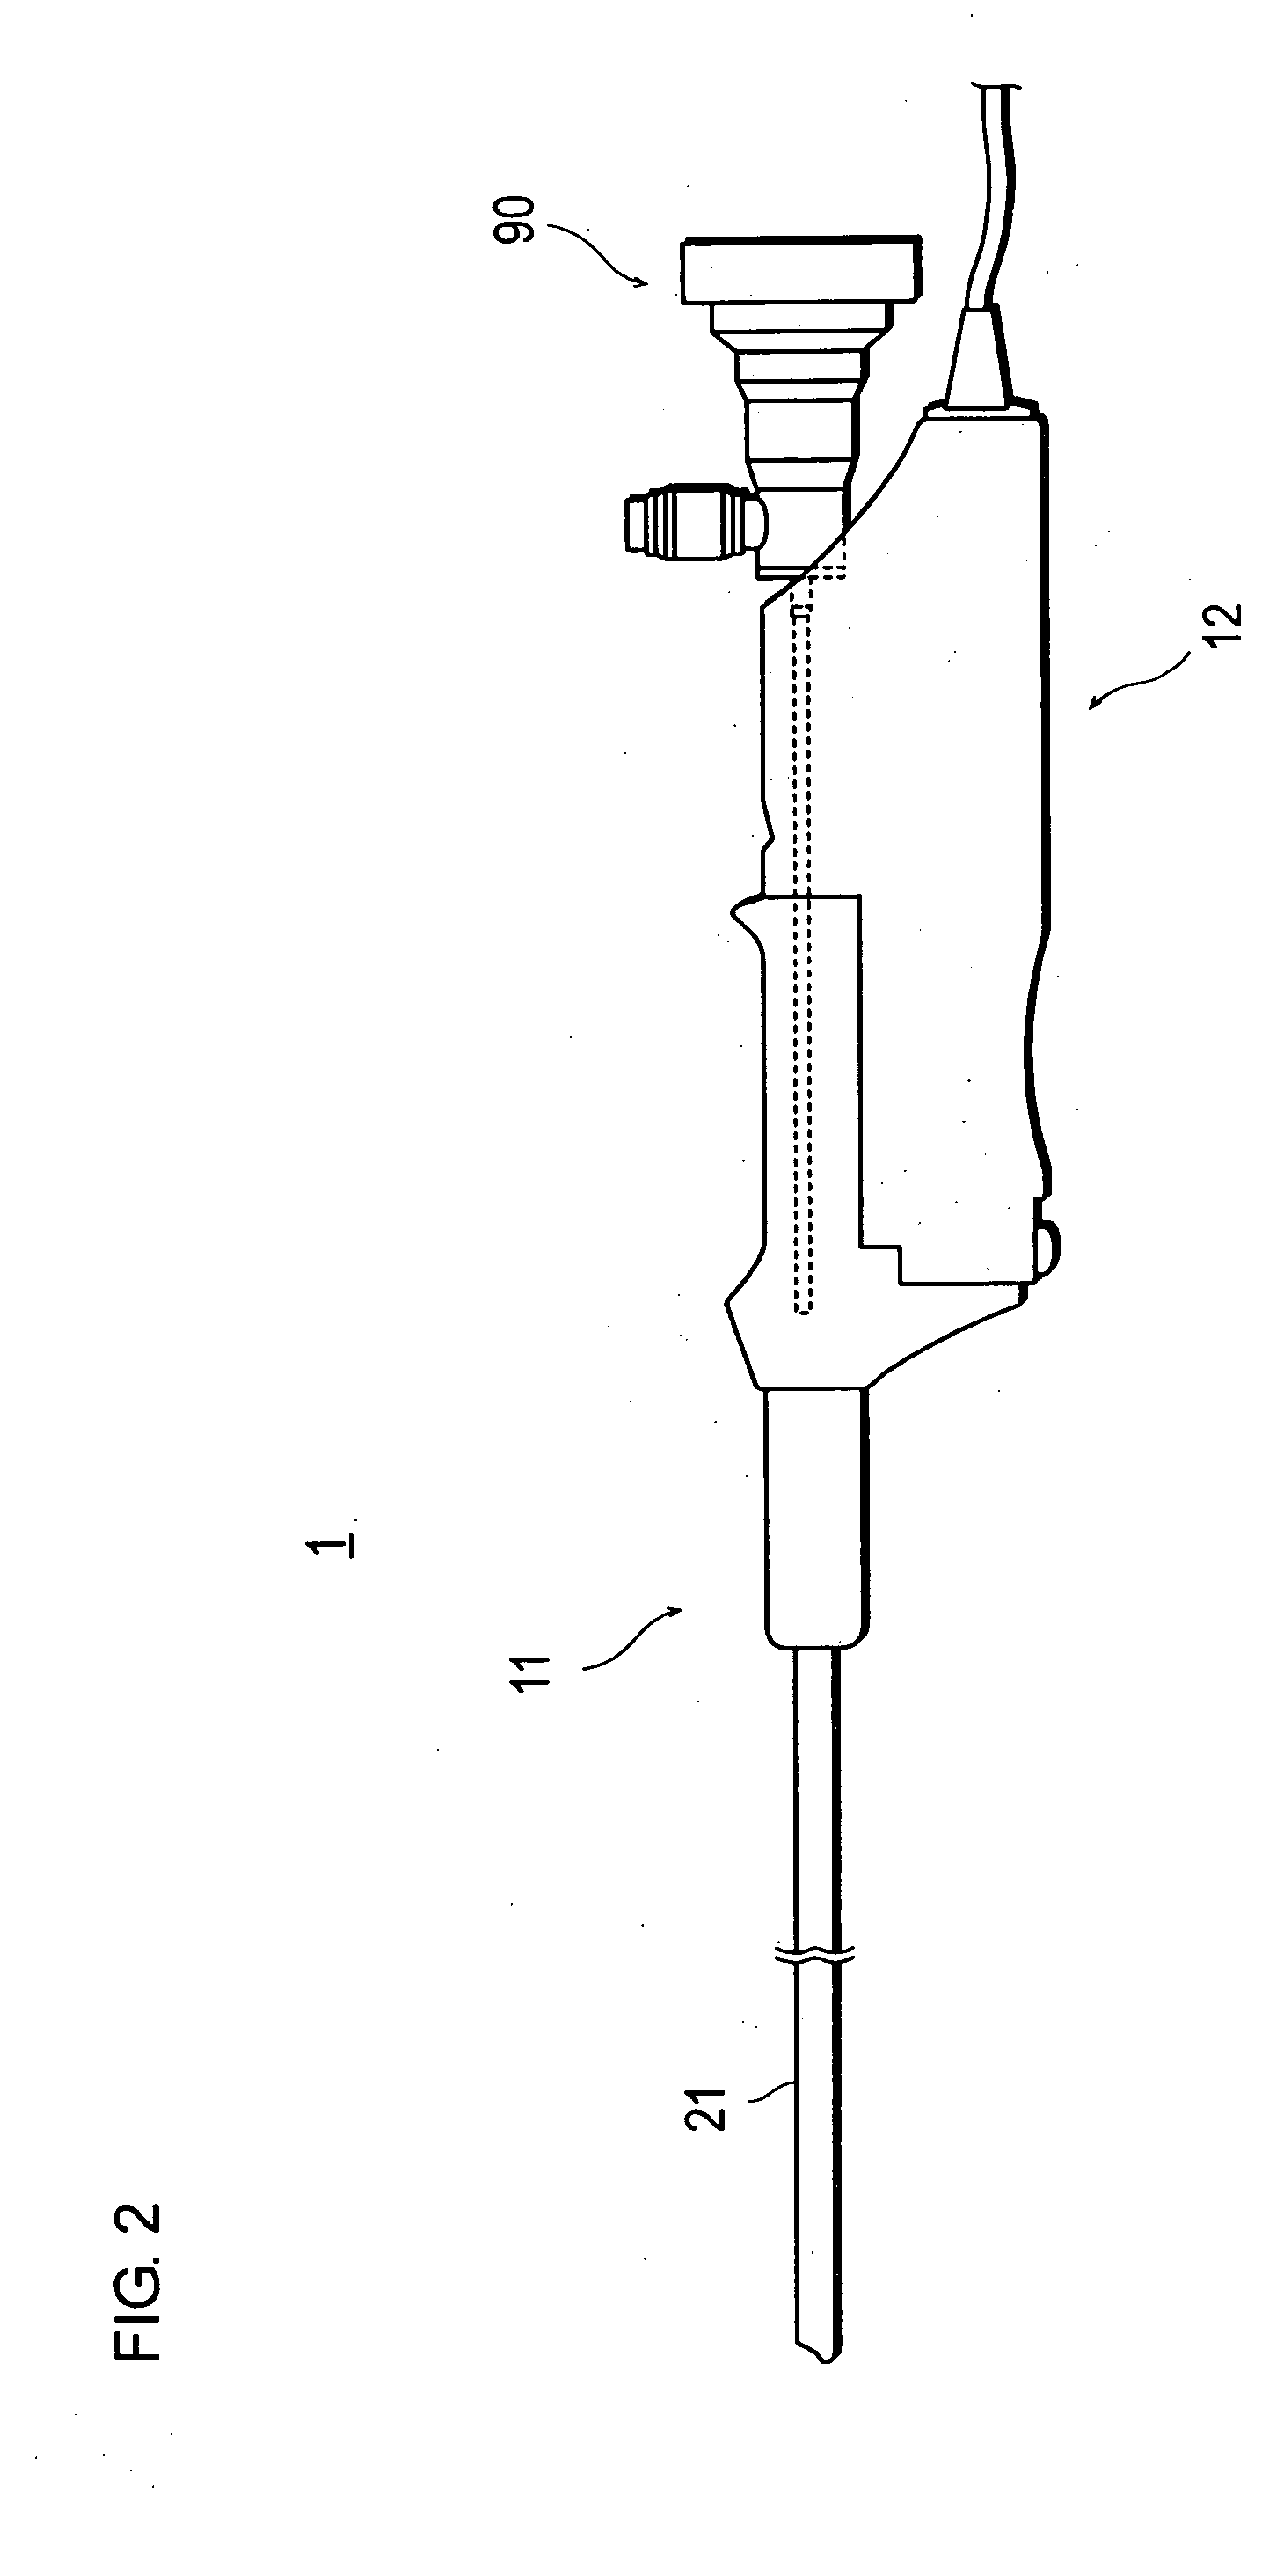 Apparatus and method for hyperthermia treatment